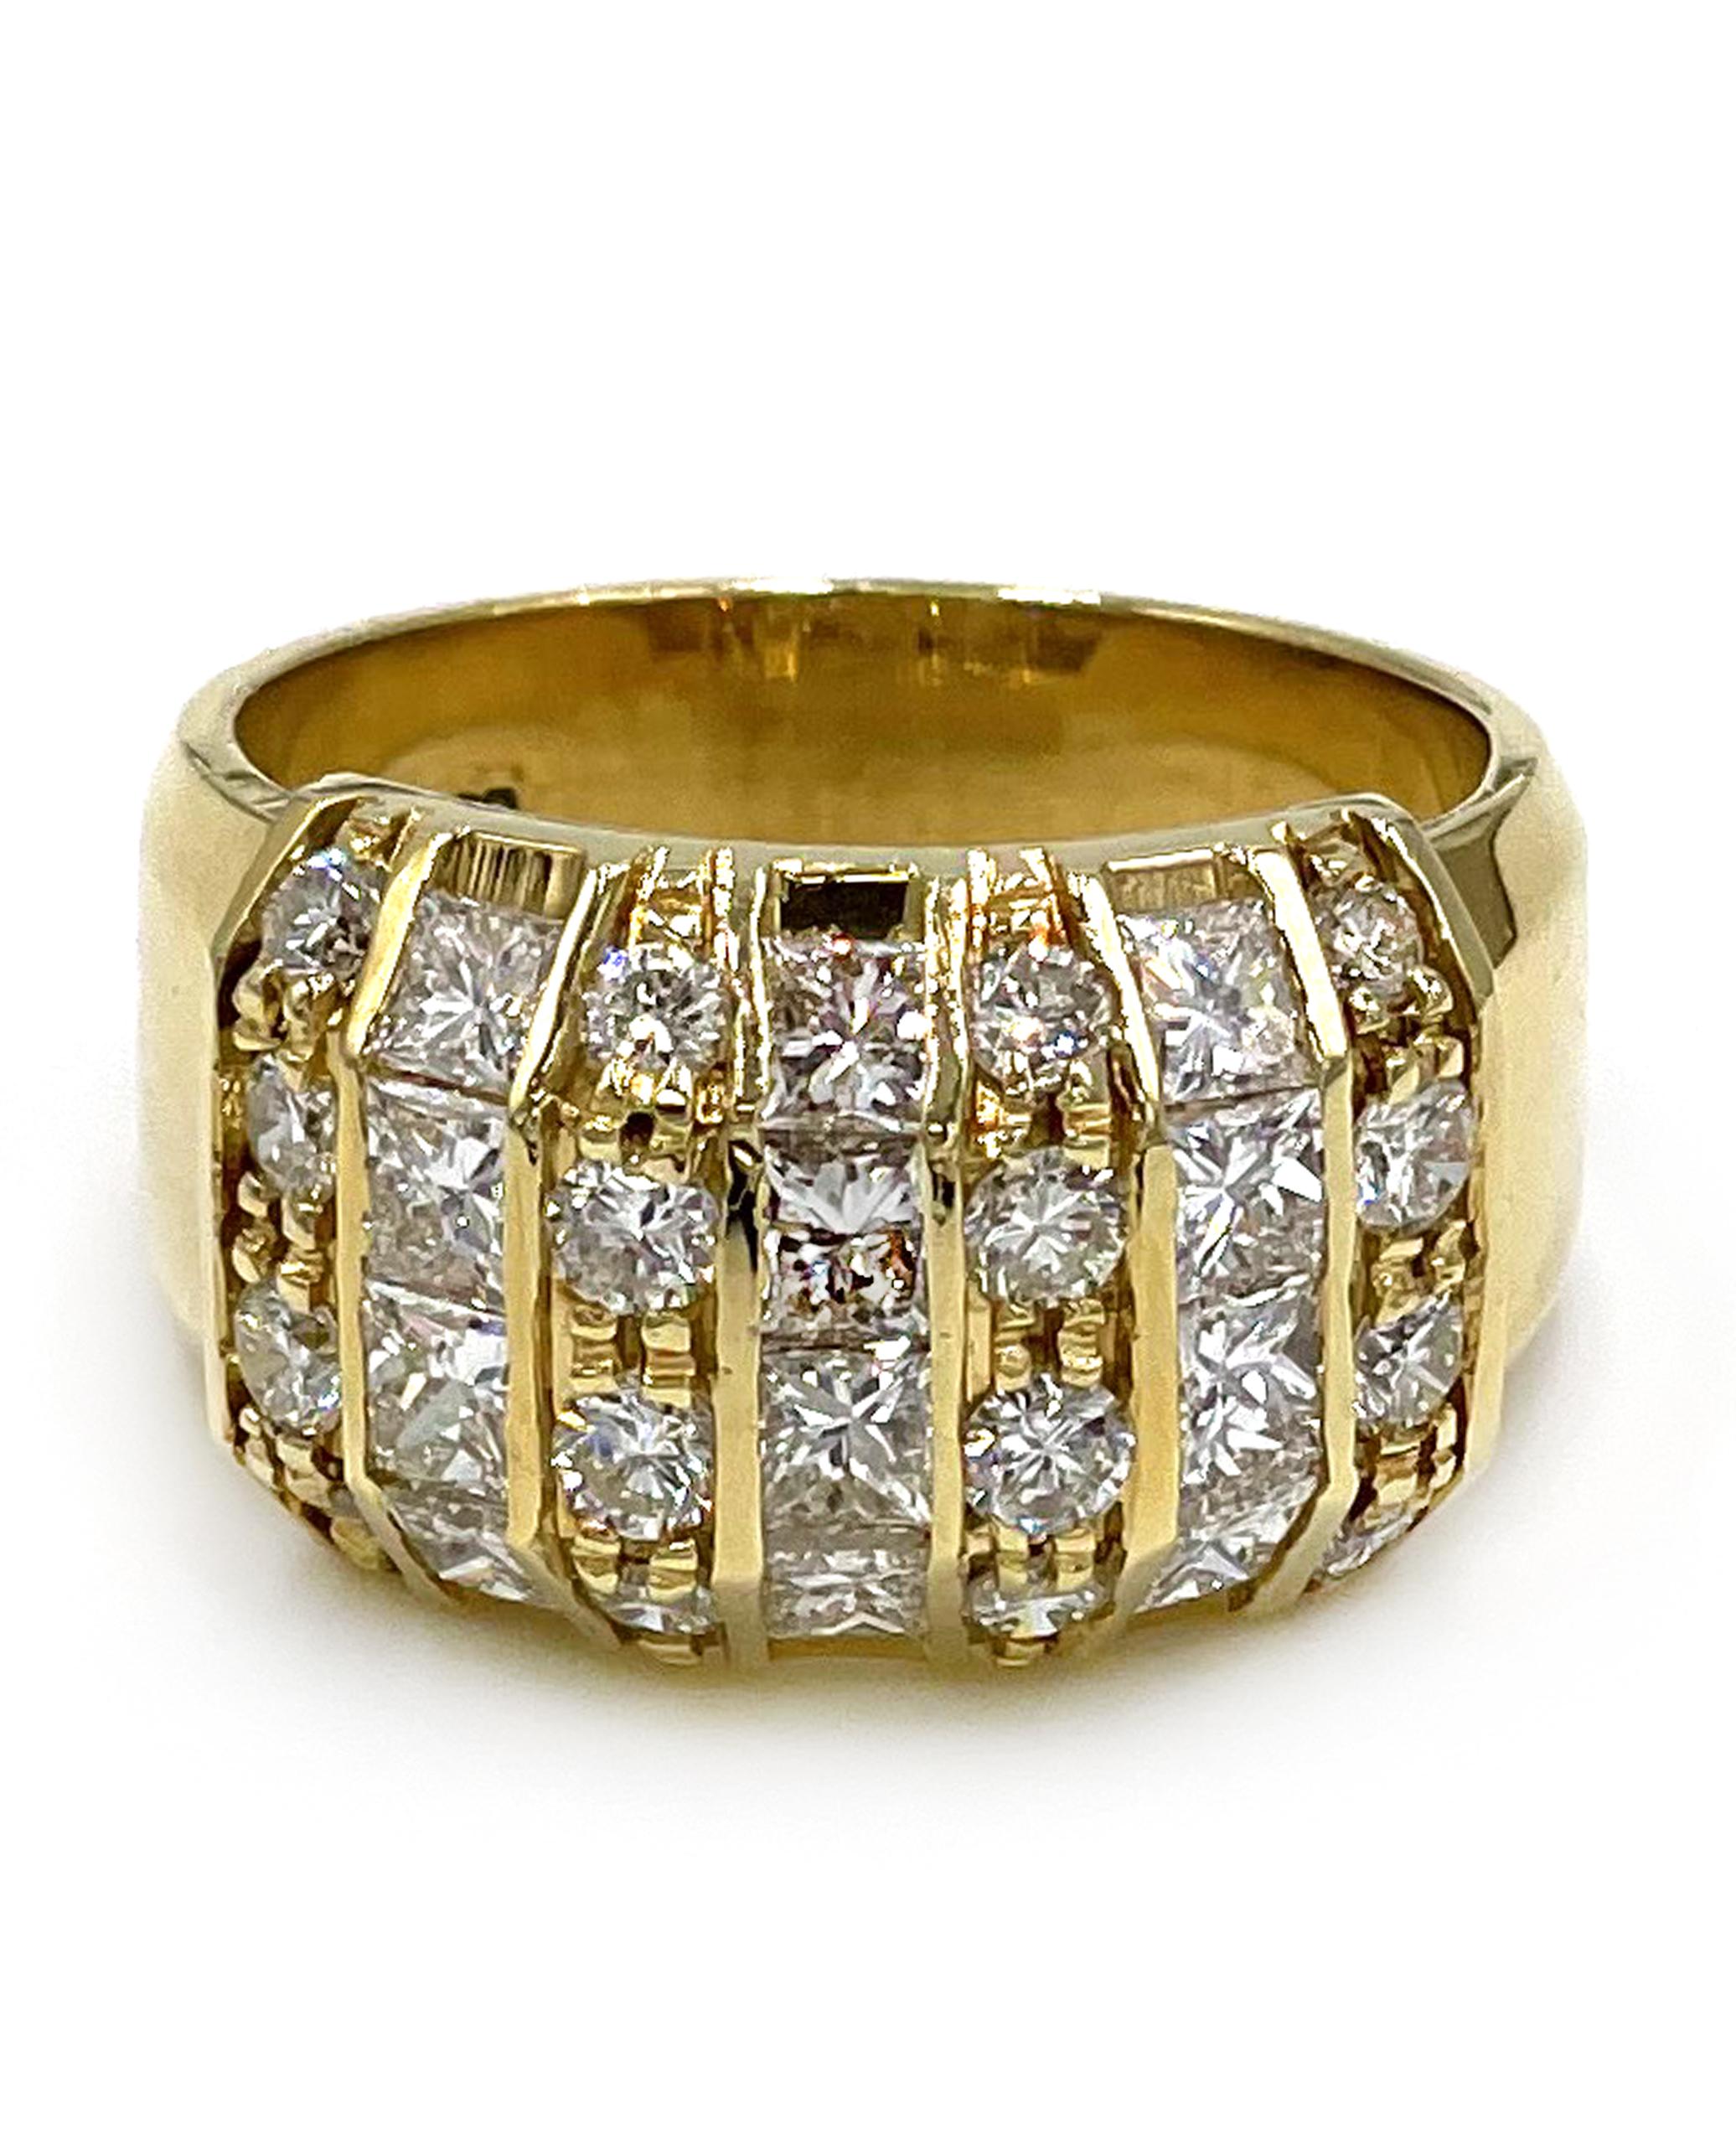 Vintage 18k Yellow Gold Diamond Ring, Circa 1985 In New Condition For Sale In Old Tappan, NJ